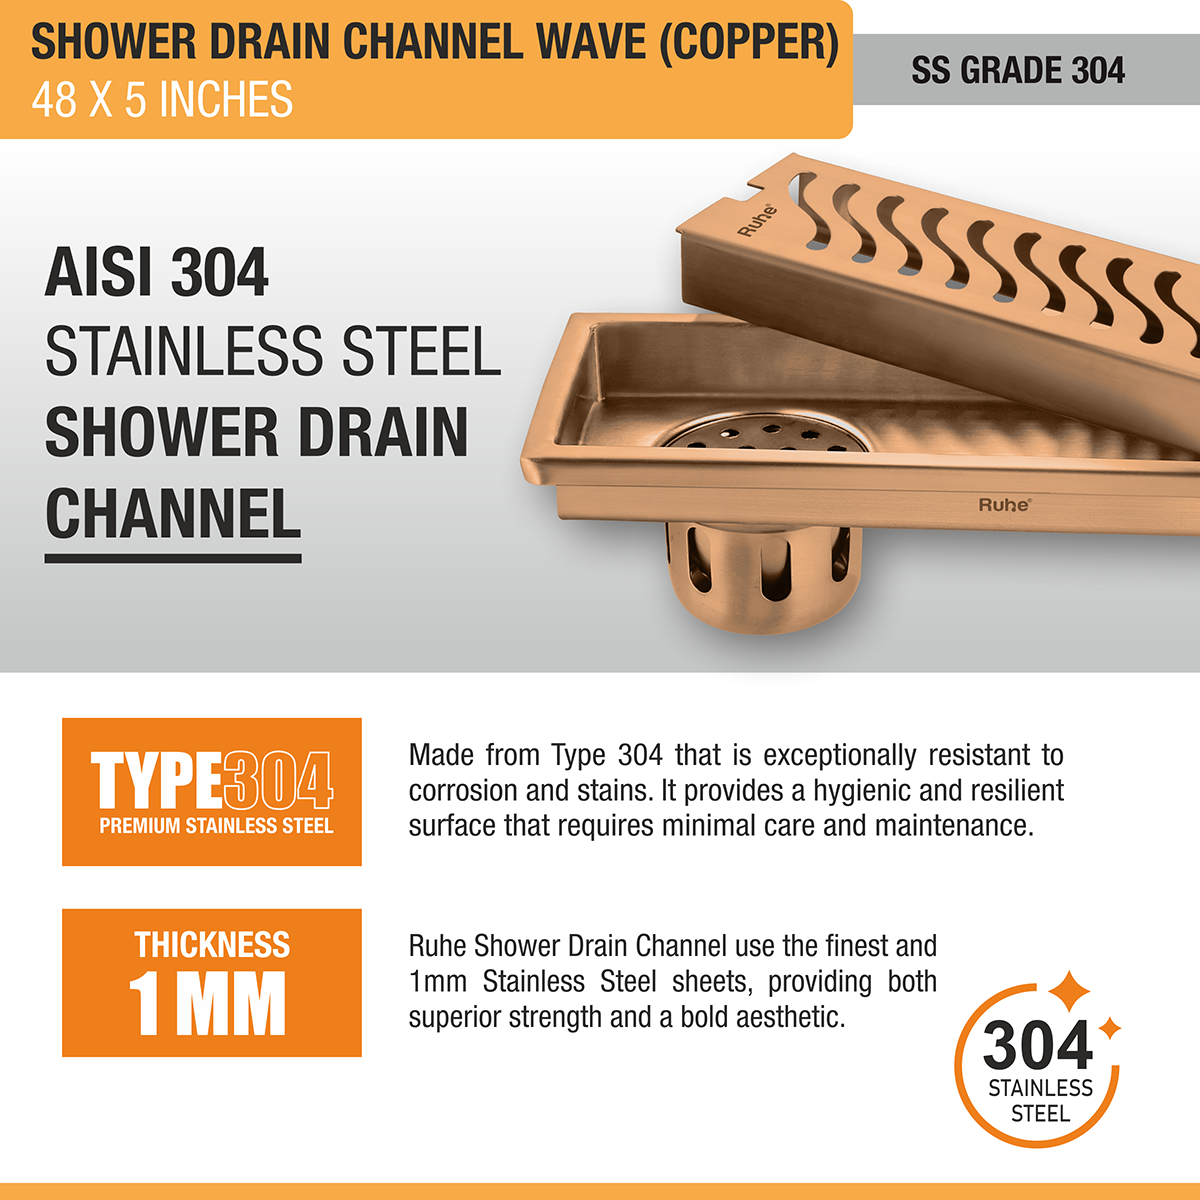 Wave Shower Drain Channel (48 x 5 Inches) ROSE GOLD/ANTIQUE COPPER stainless steel